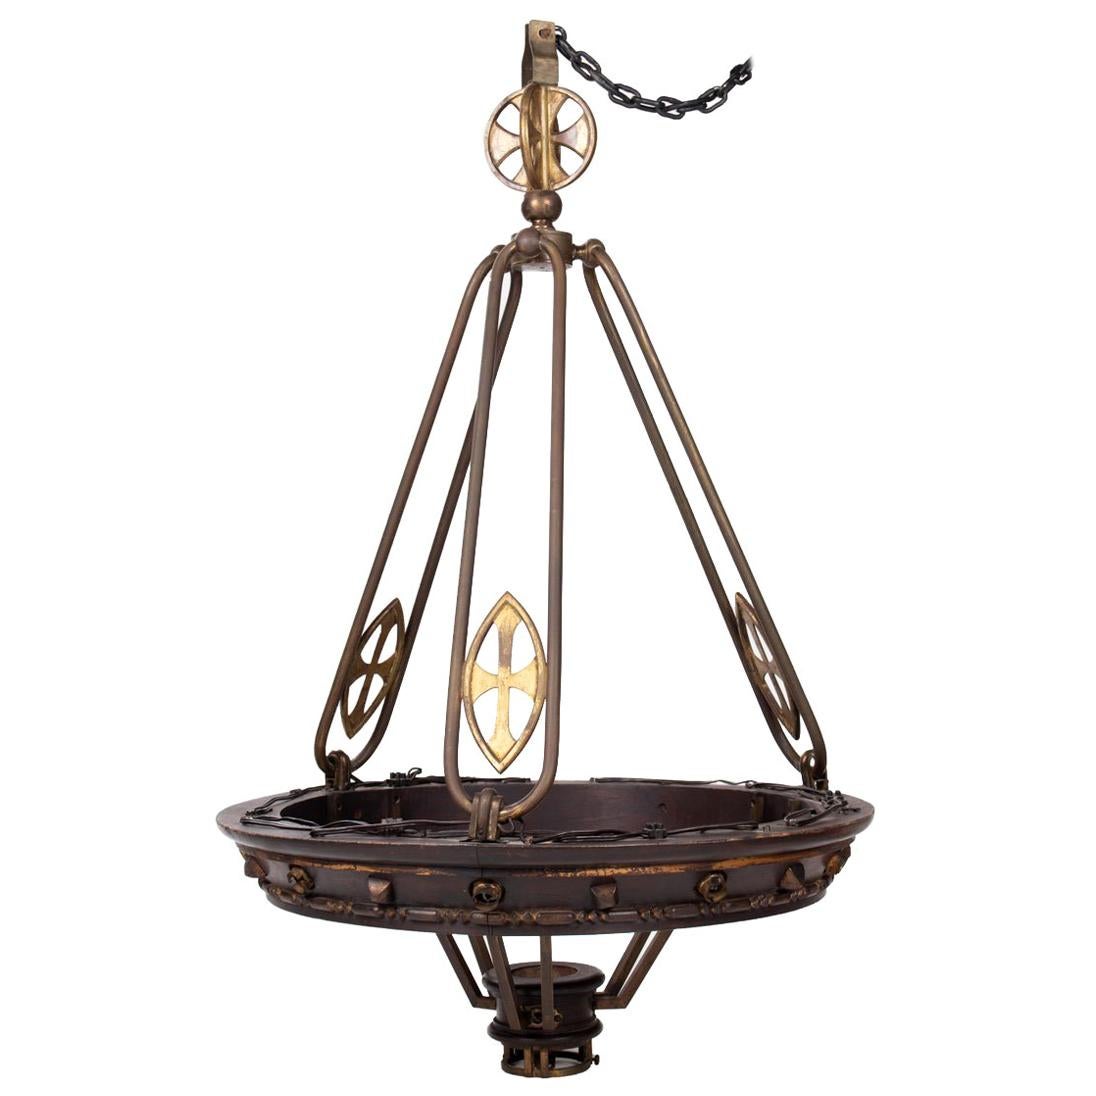 19th Century French Brass and Wood Hanging Lamp Decorated with Crosses